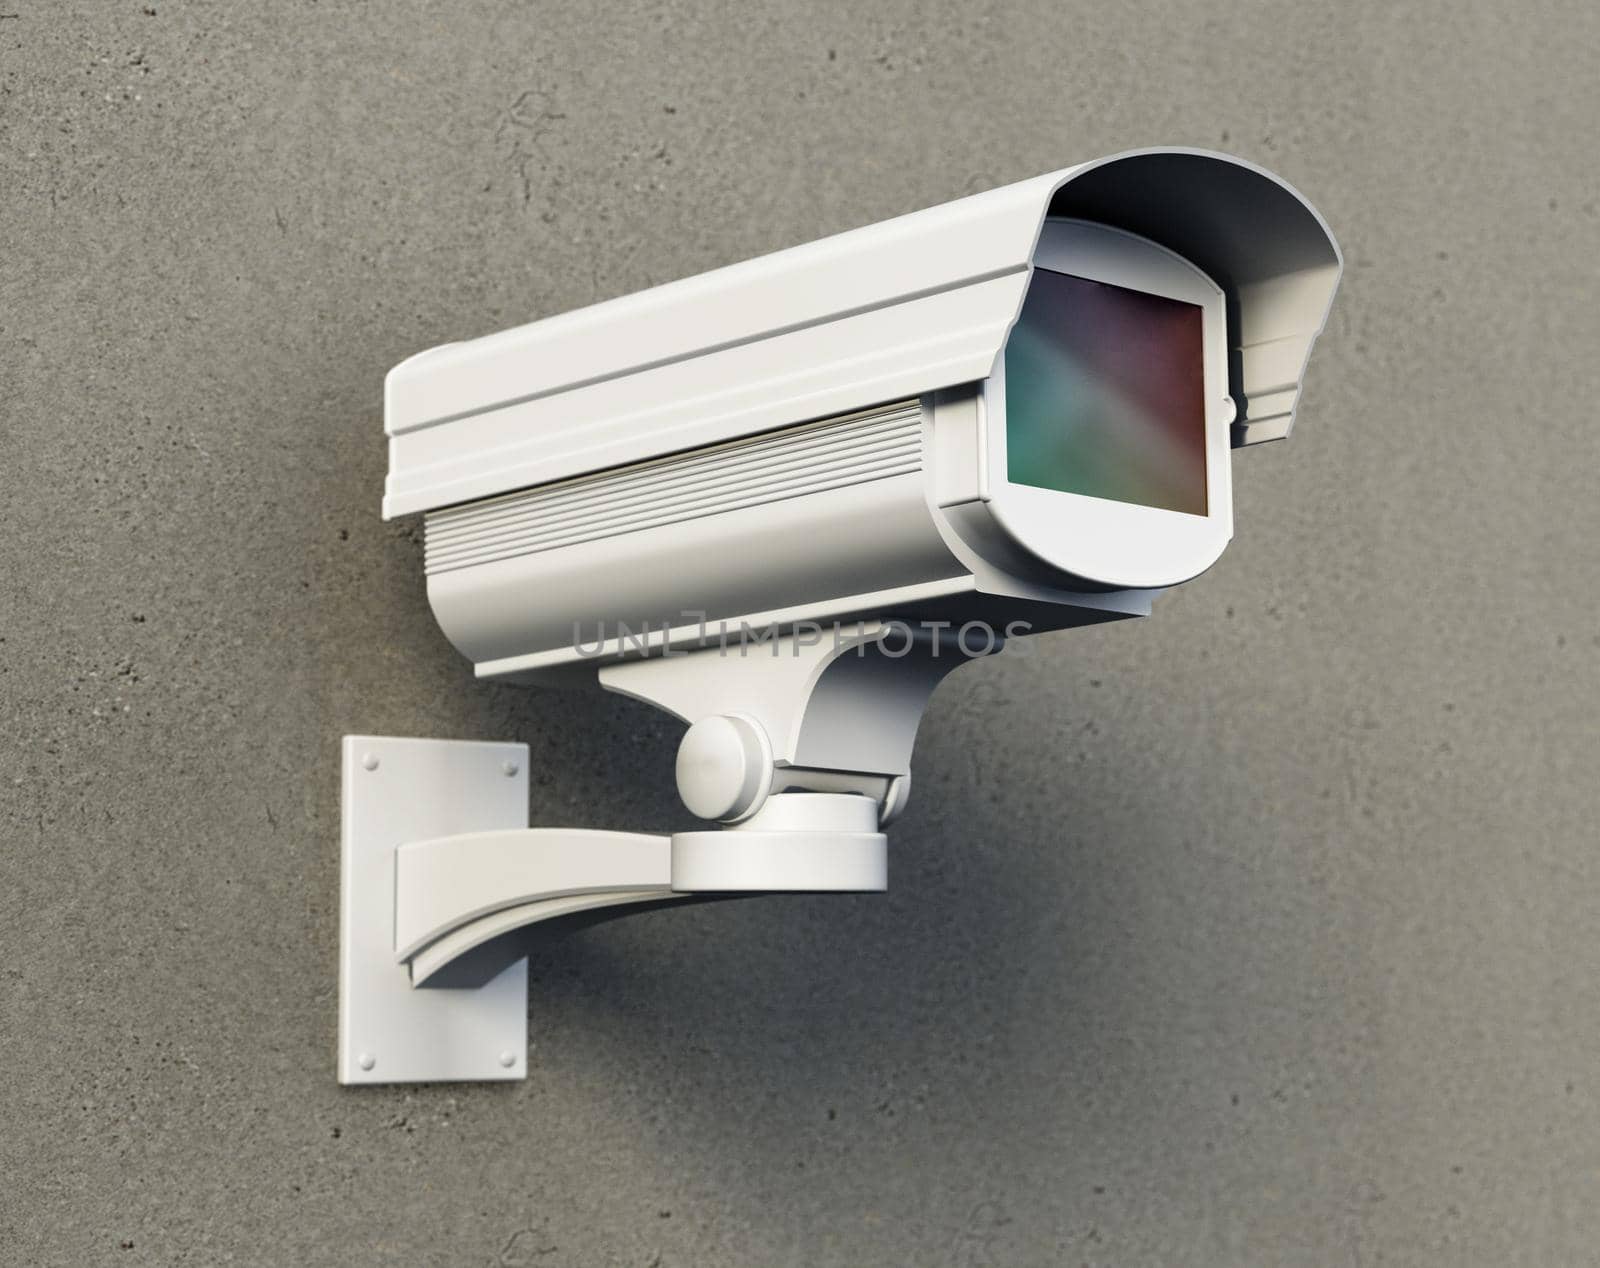 CCTV camera on the wall. 3D illustration by Simsek